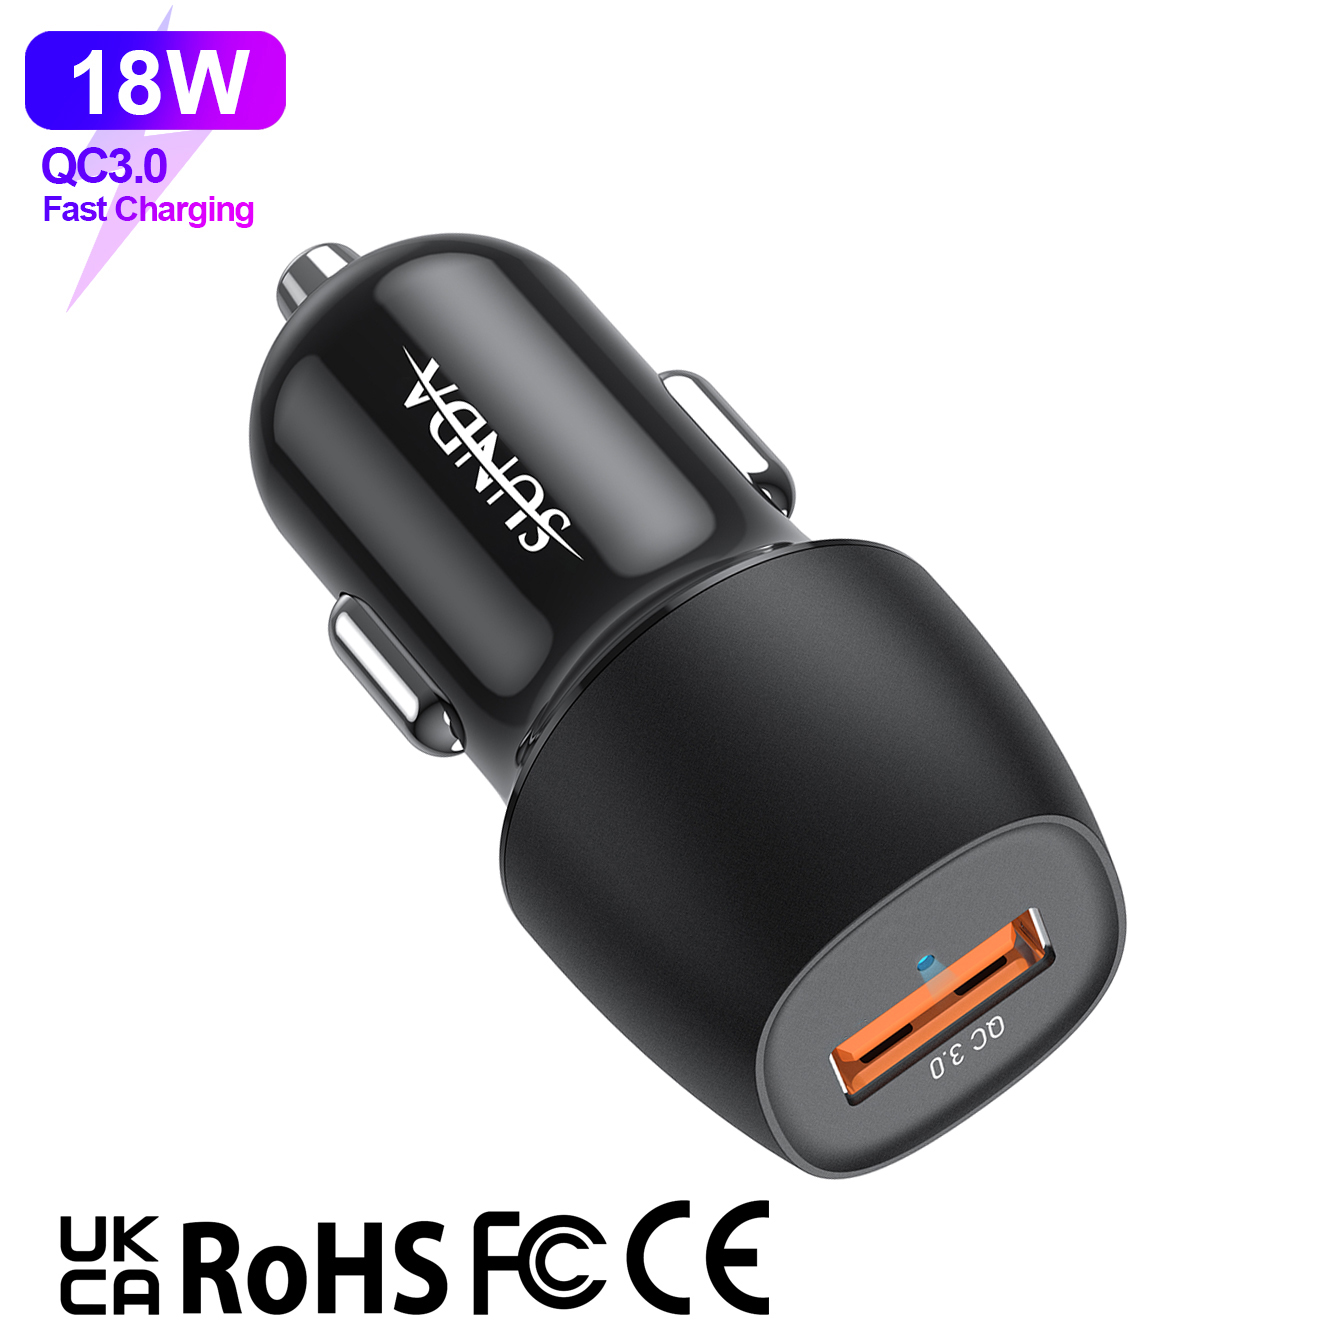  SUNDA USB C Fast Car Charger Dual Ports PD/PPS&QC3.0, Cell Phone Automobile Chargers, for Apple Smart-Phones and Android Car Charger